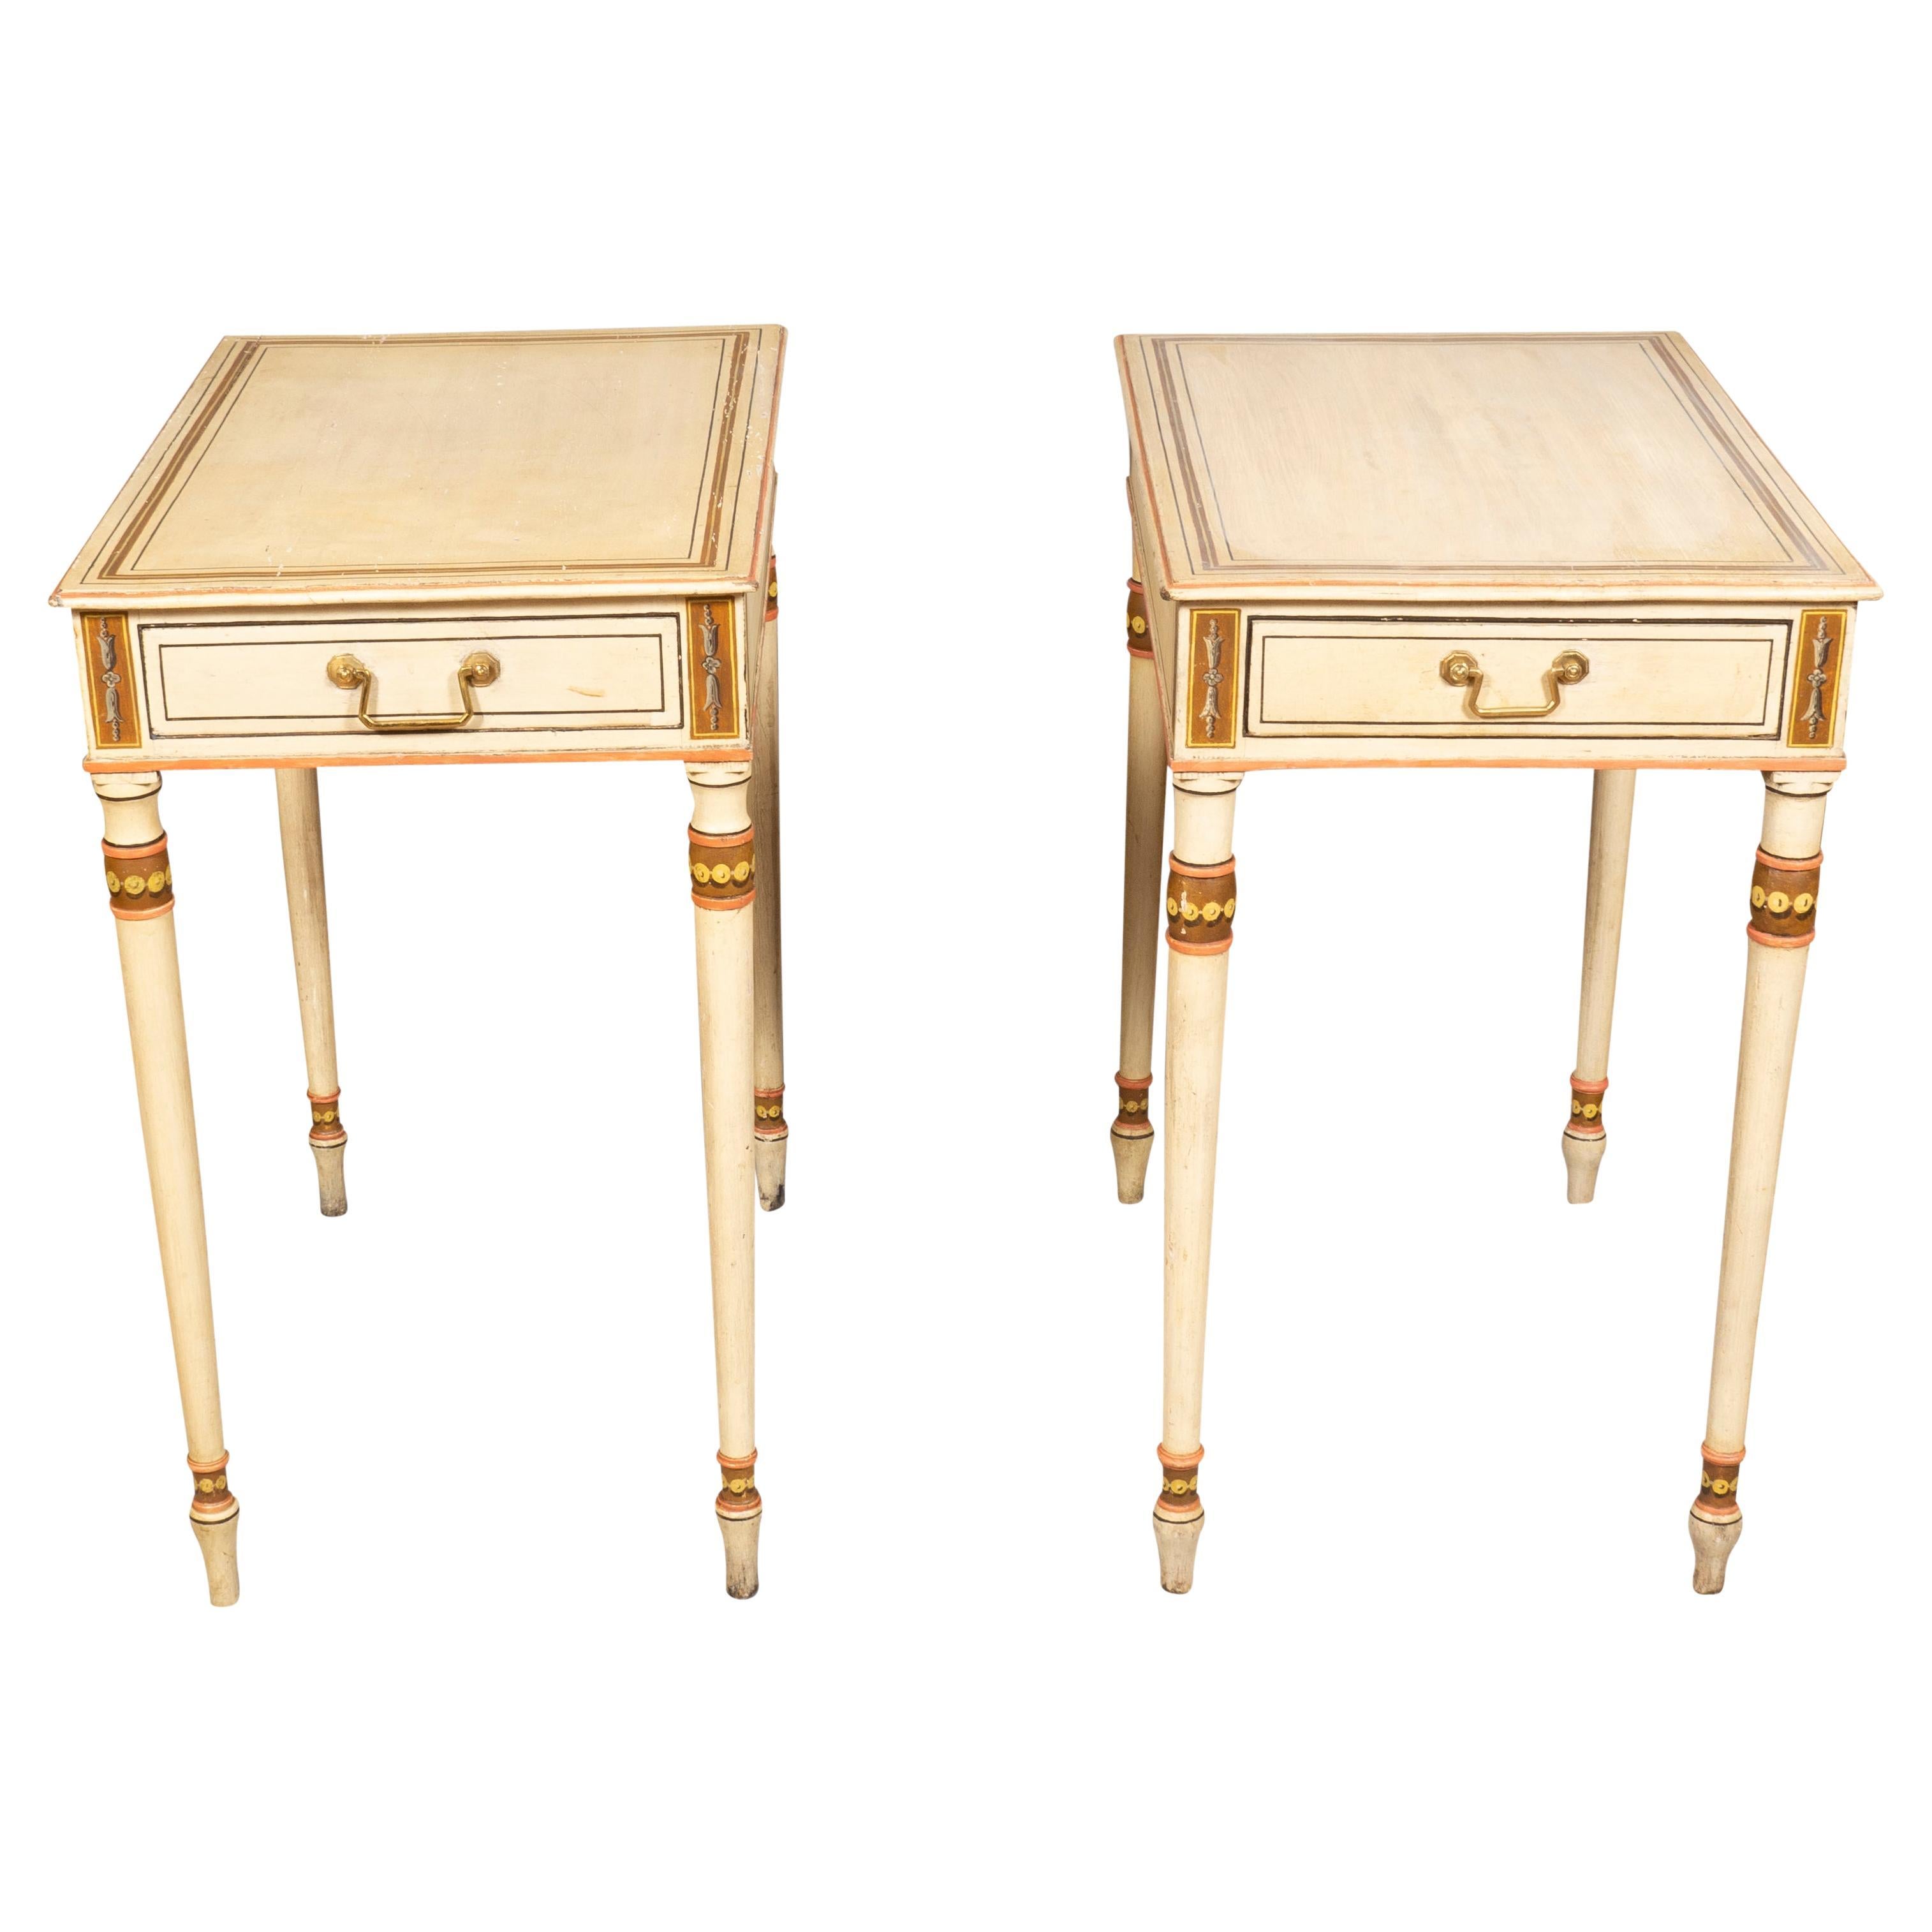 Each creme painted with ochre and grisaille detail. rectangular with a single drawer with square bail handle. Circular tapered legs and toupie feet.